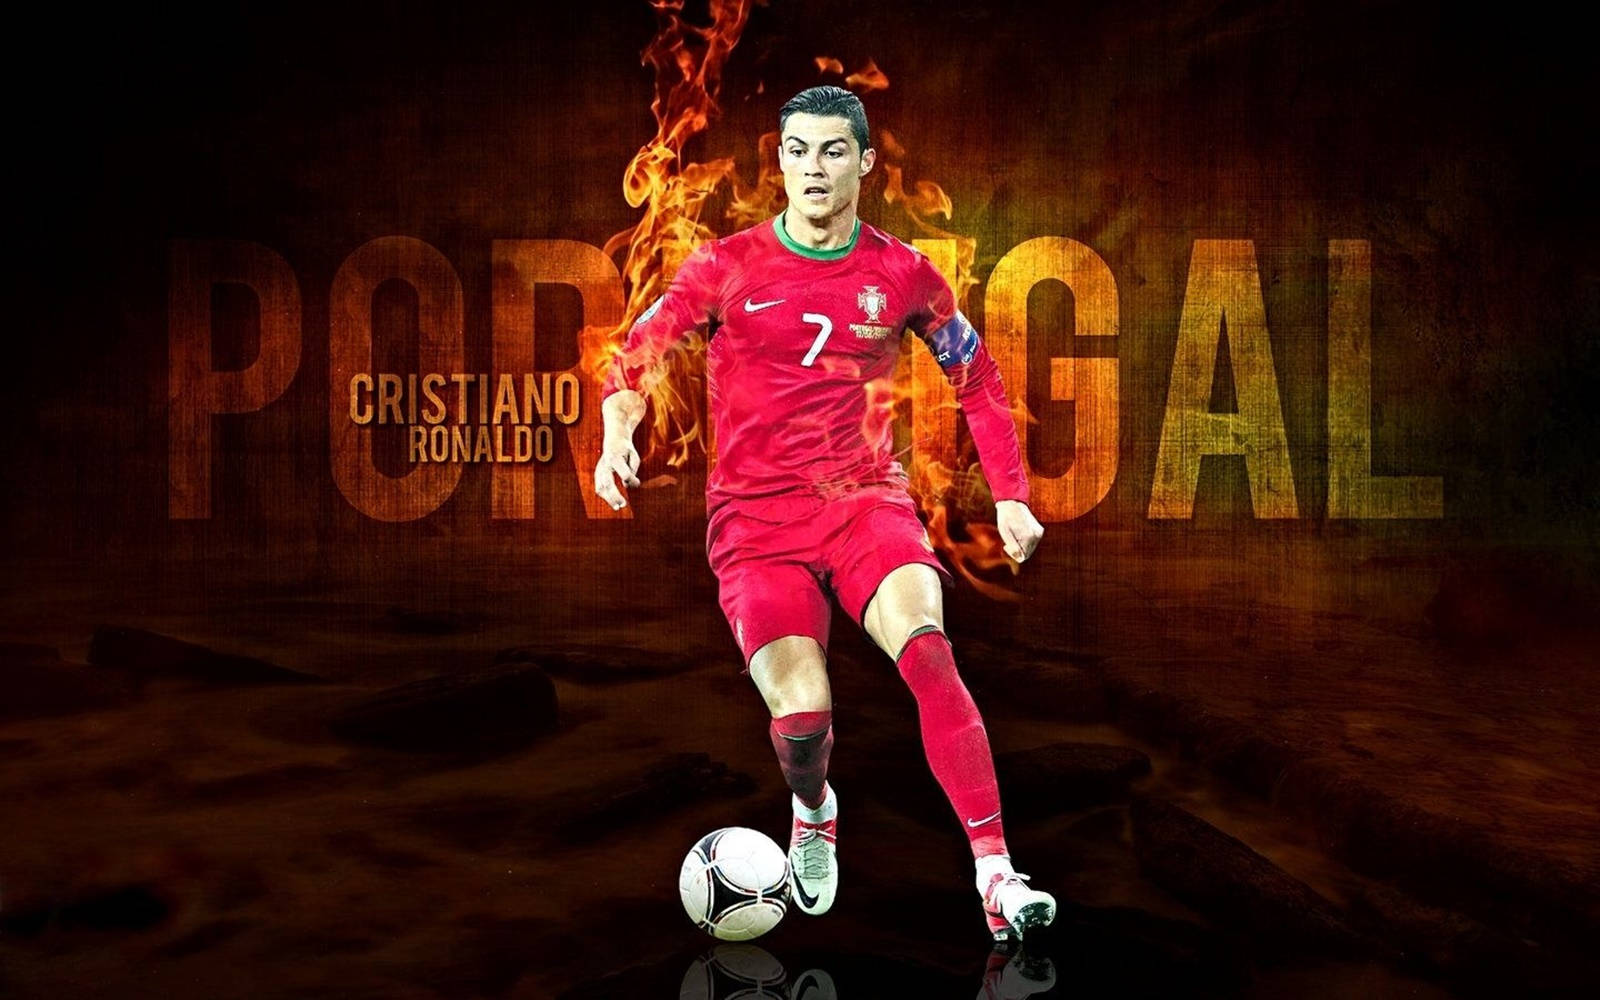 Cristiano Ronaldo Wallpapers HD 74 images